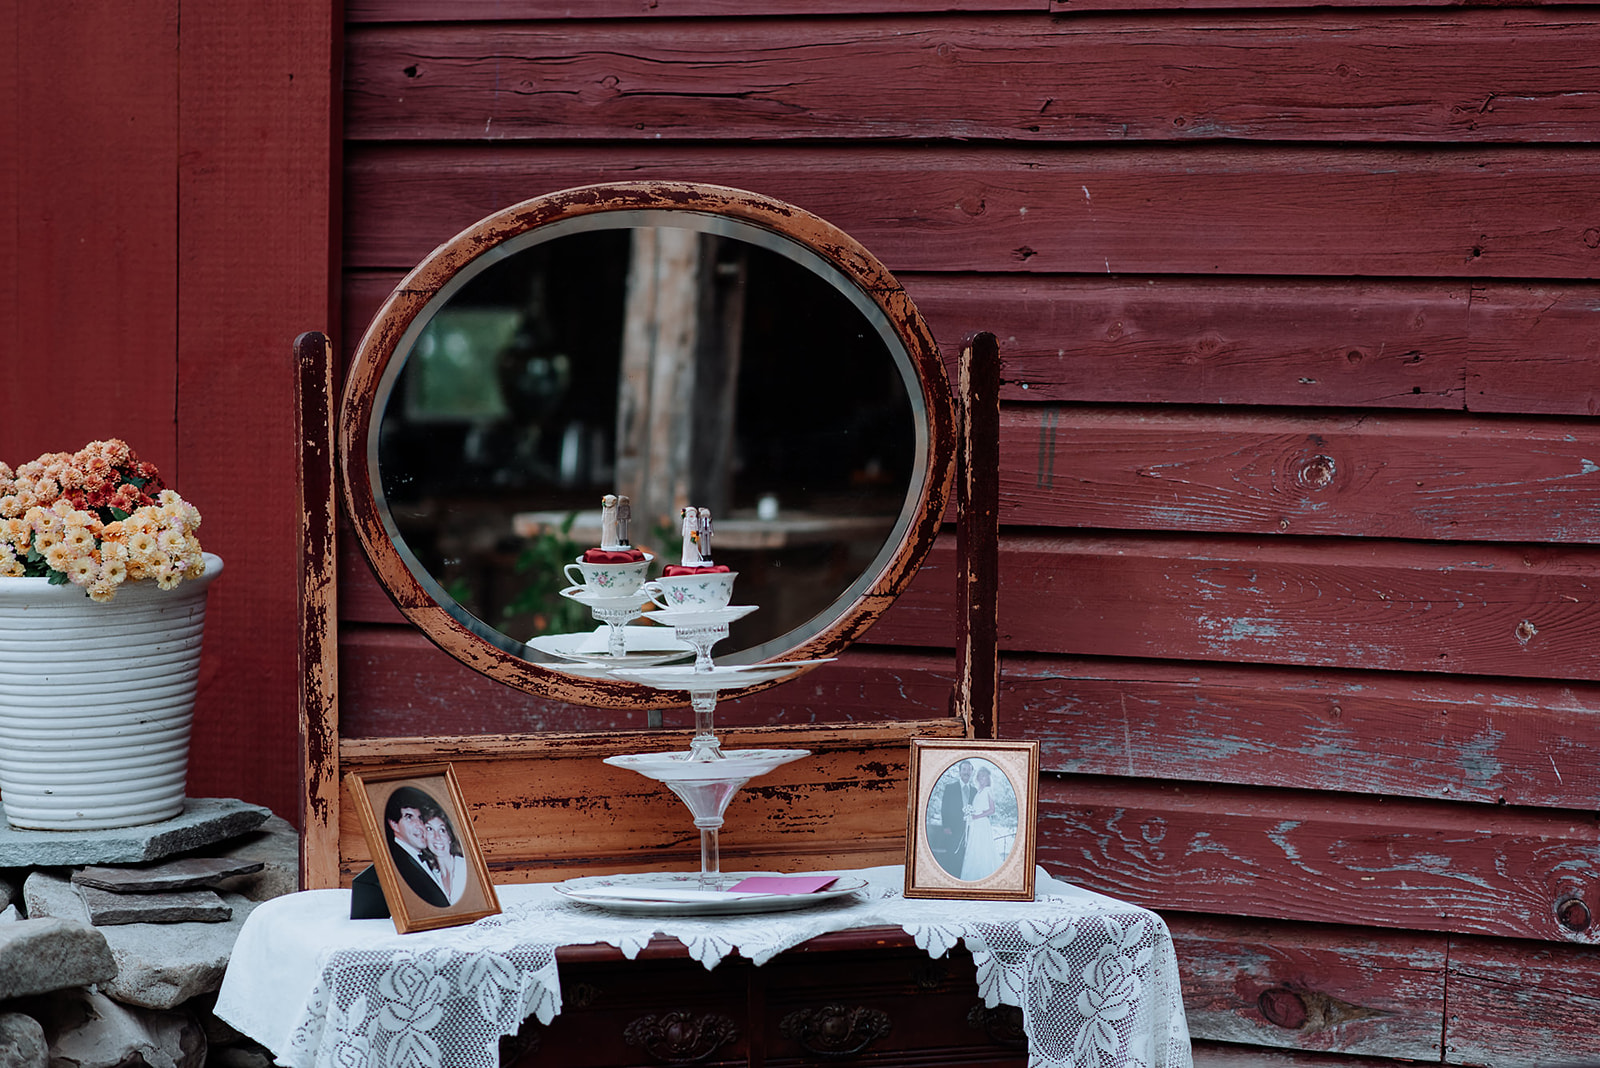 Old antique dresser with mirror holds cake plate and vintage wedding decor.